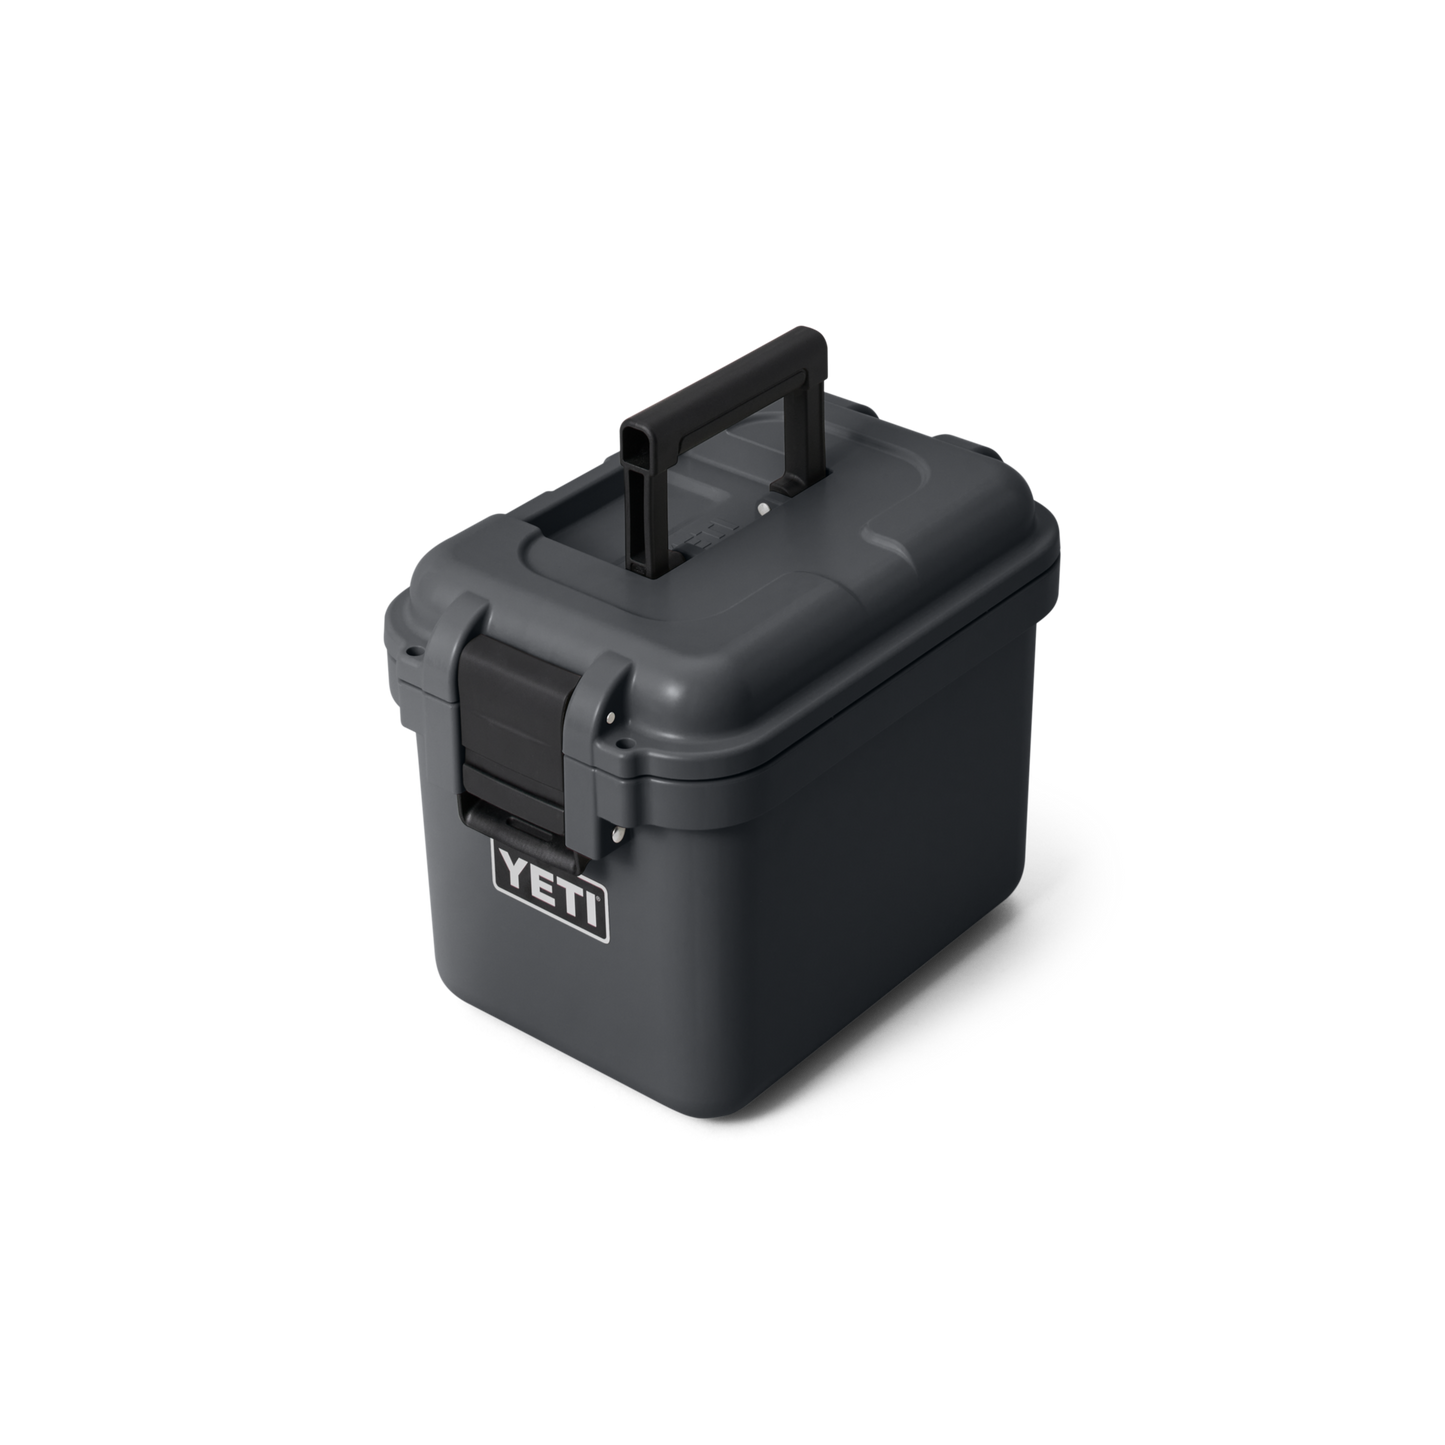 Yeti Loadout Go Box 15 Gear Case Charcoal - Dogfish Tackle & Marine